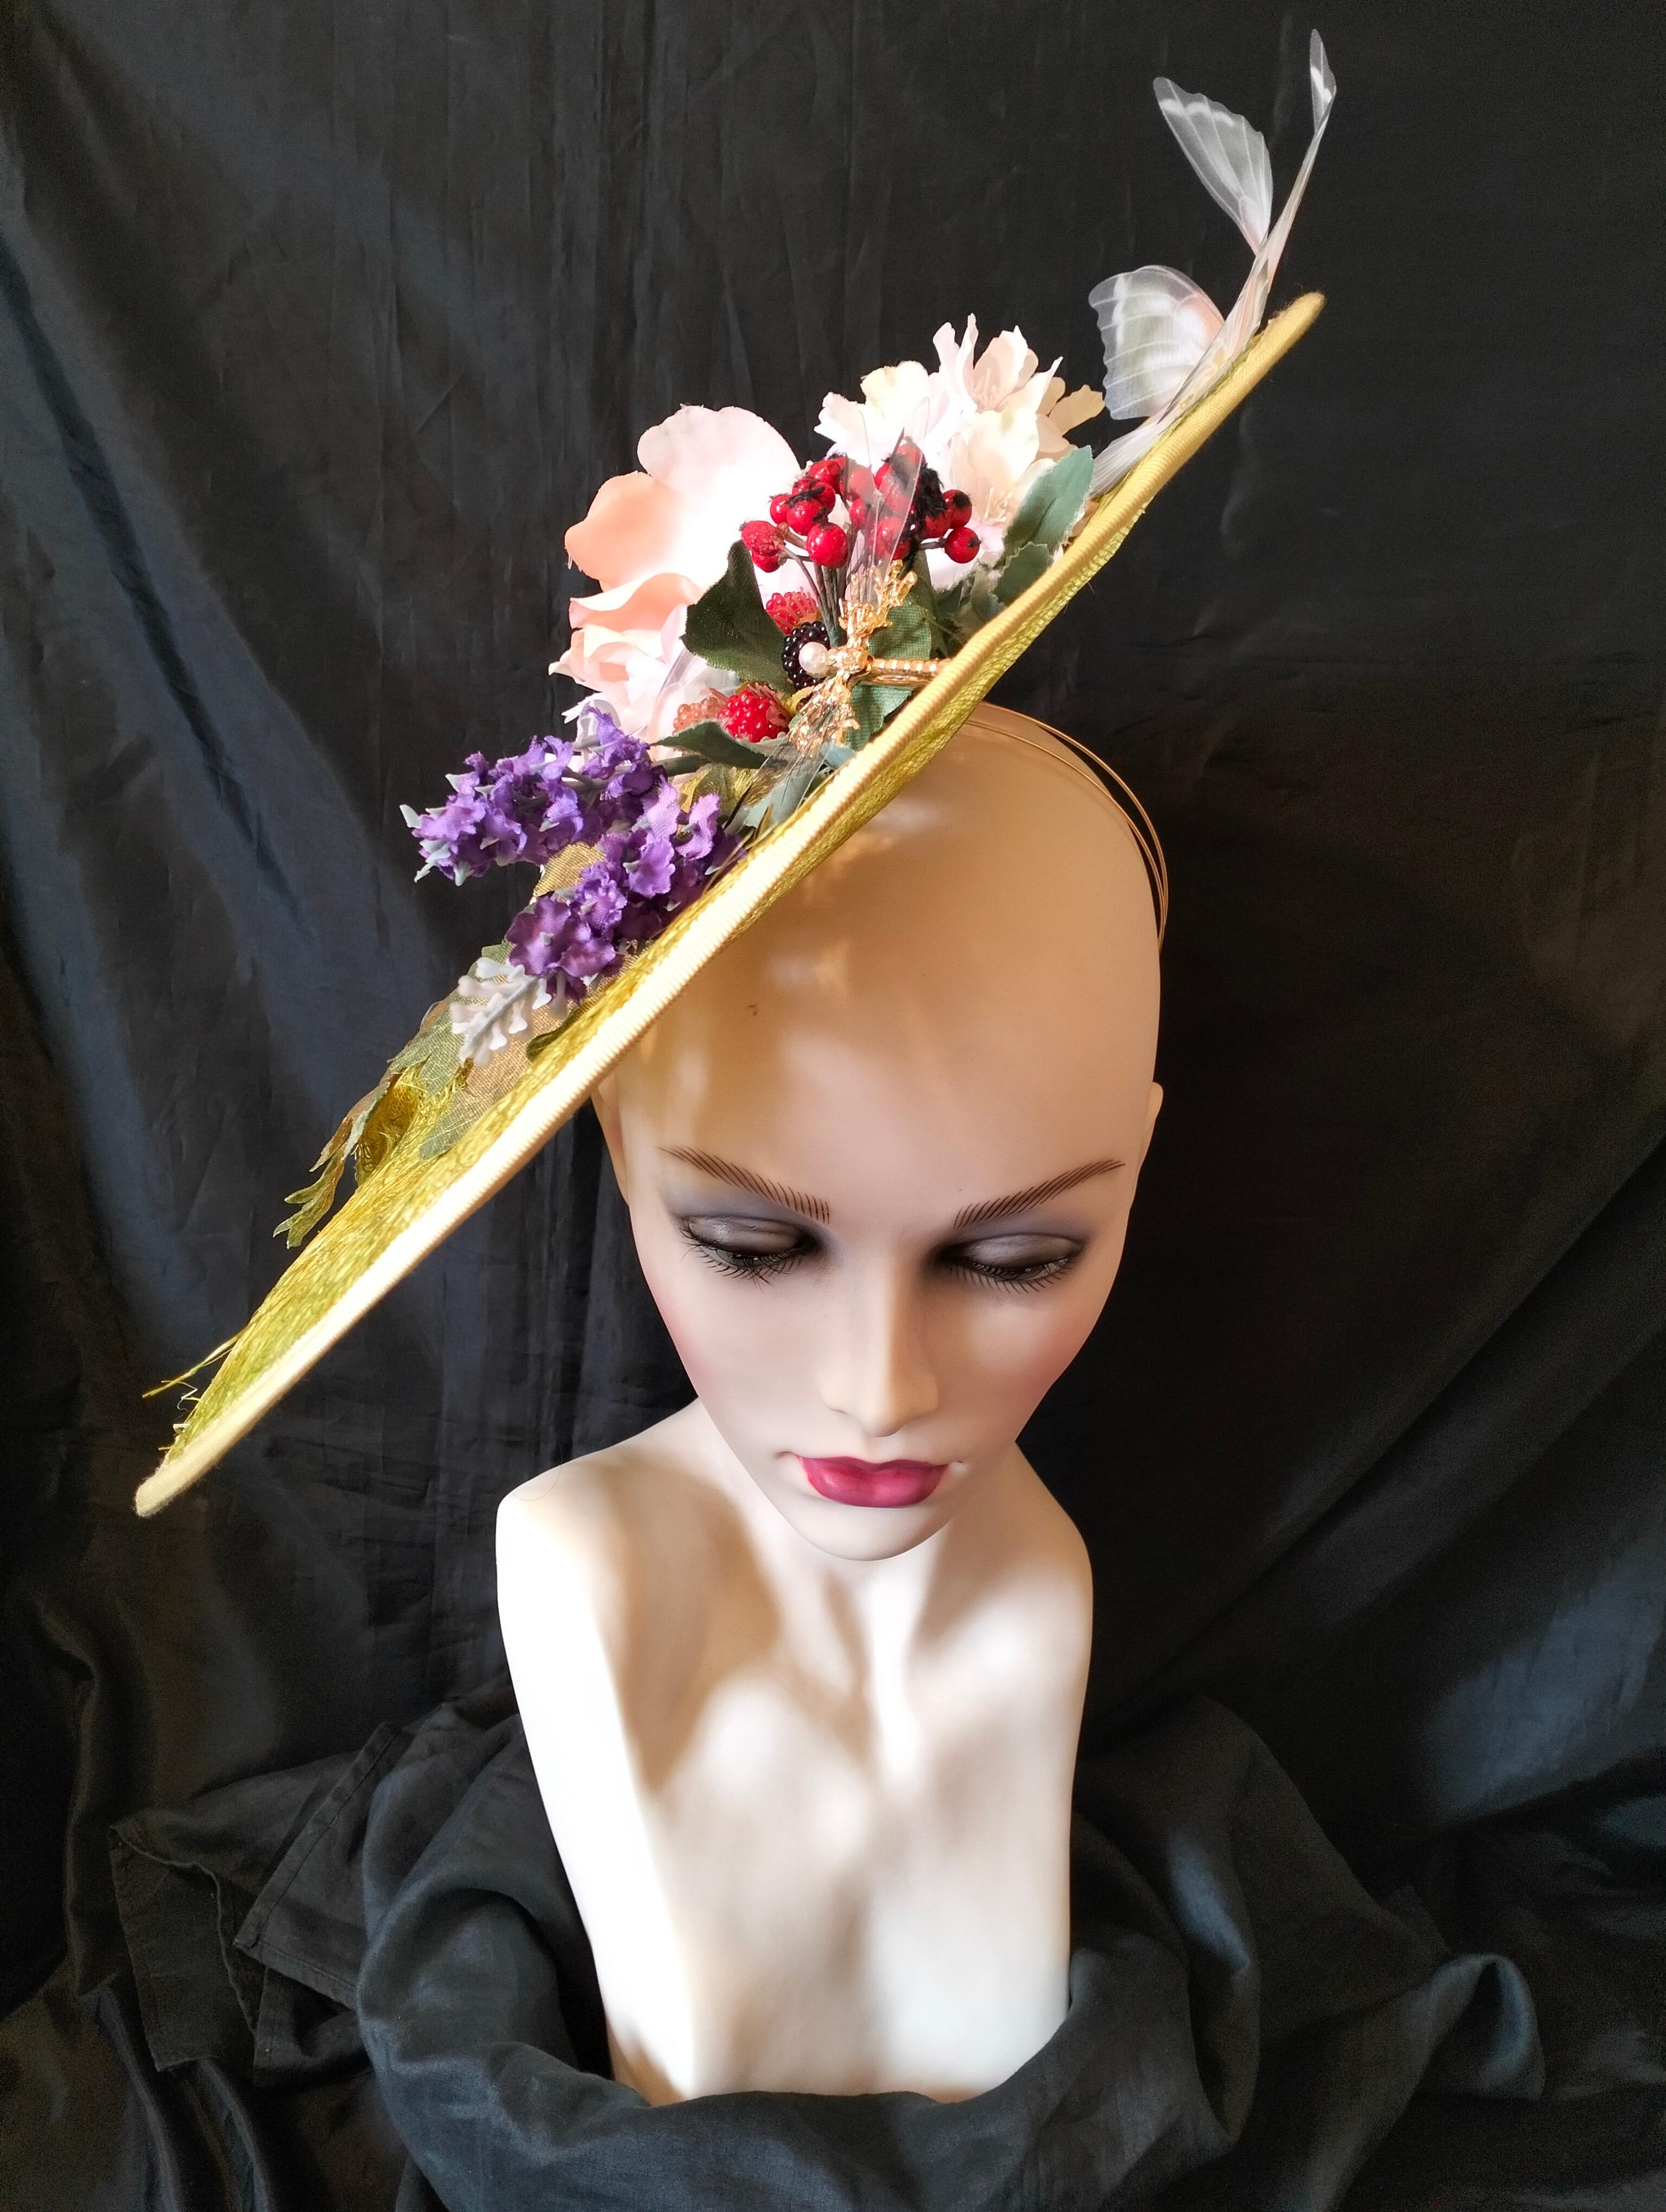 The perfect formal hat for those special occasions hat. A grass green disc with garden flowers